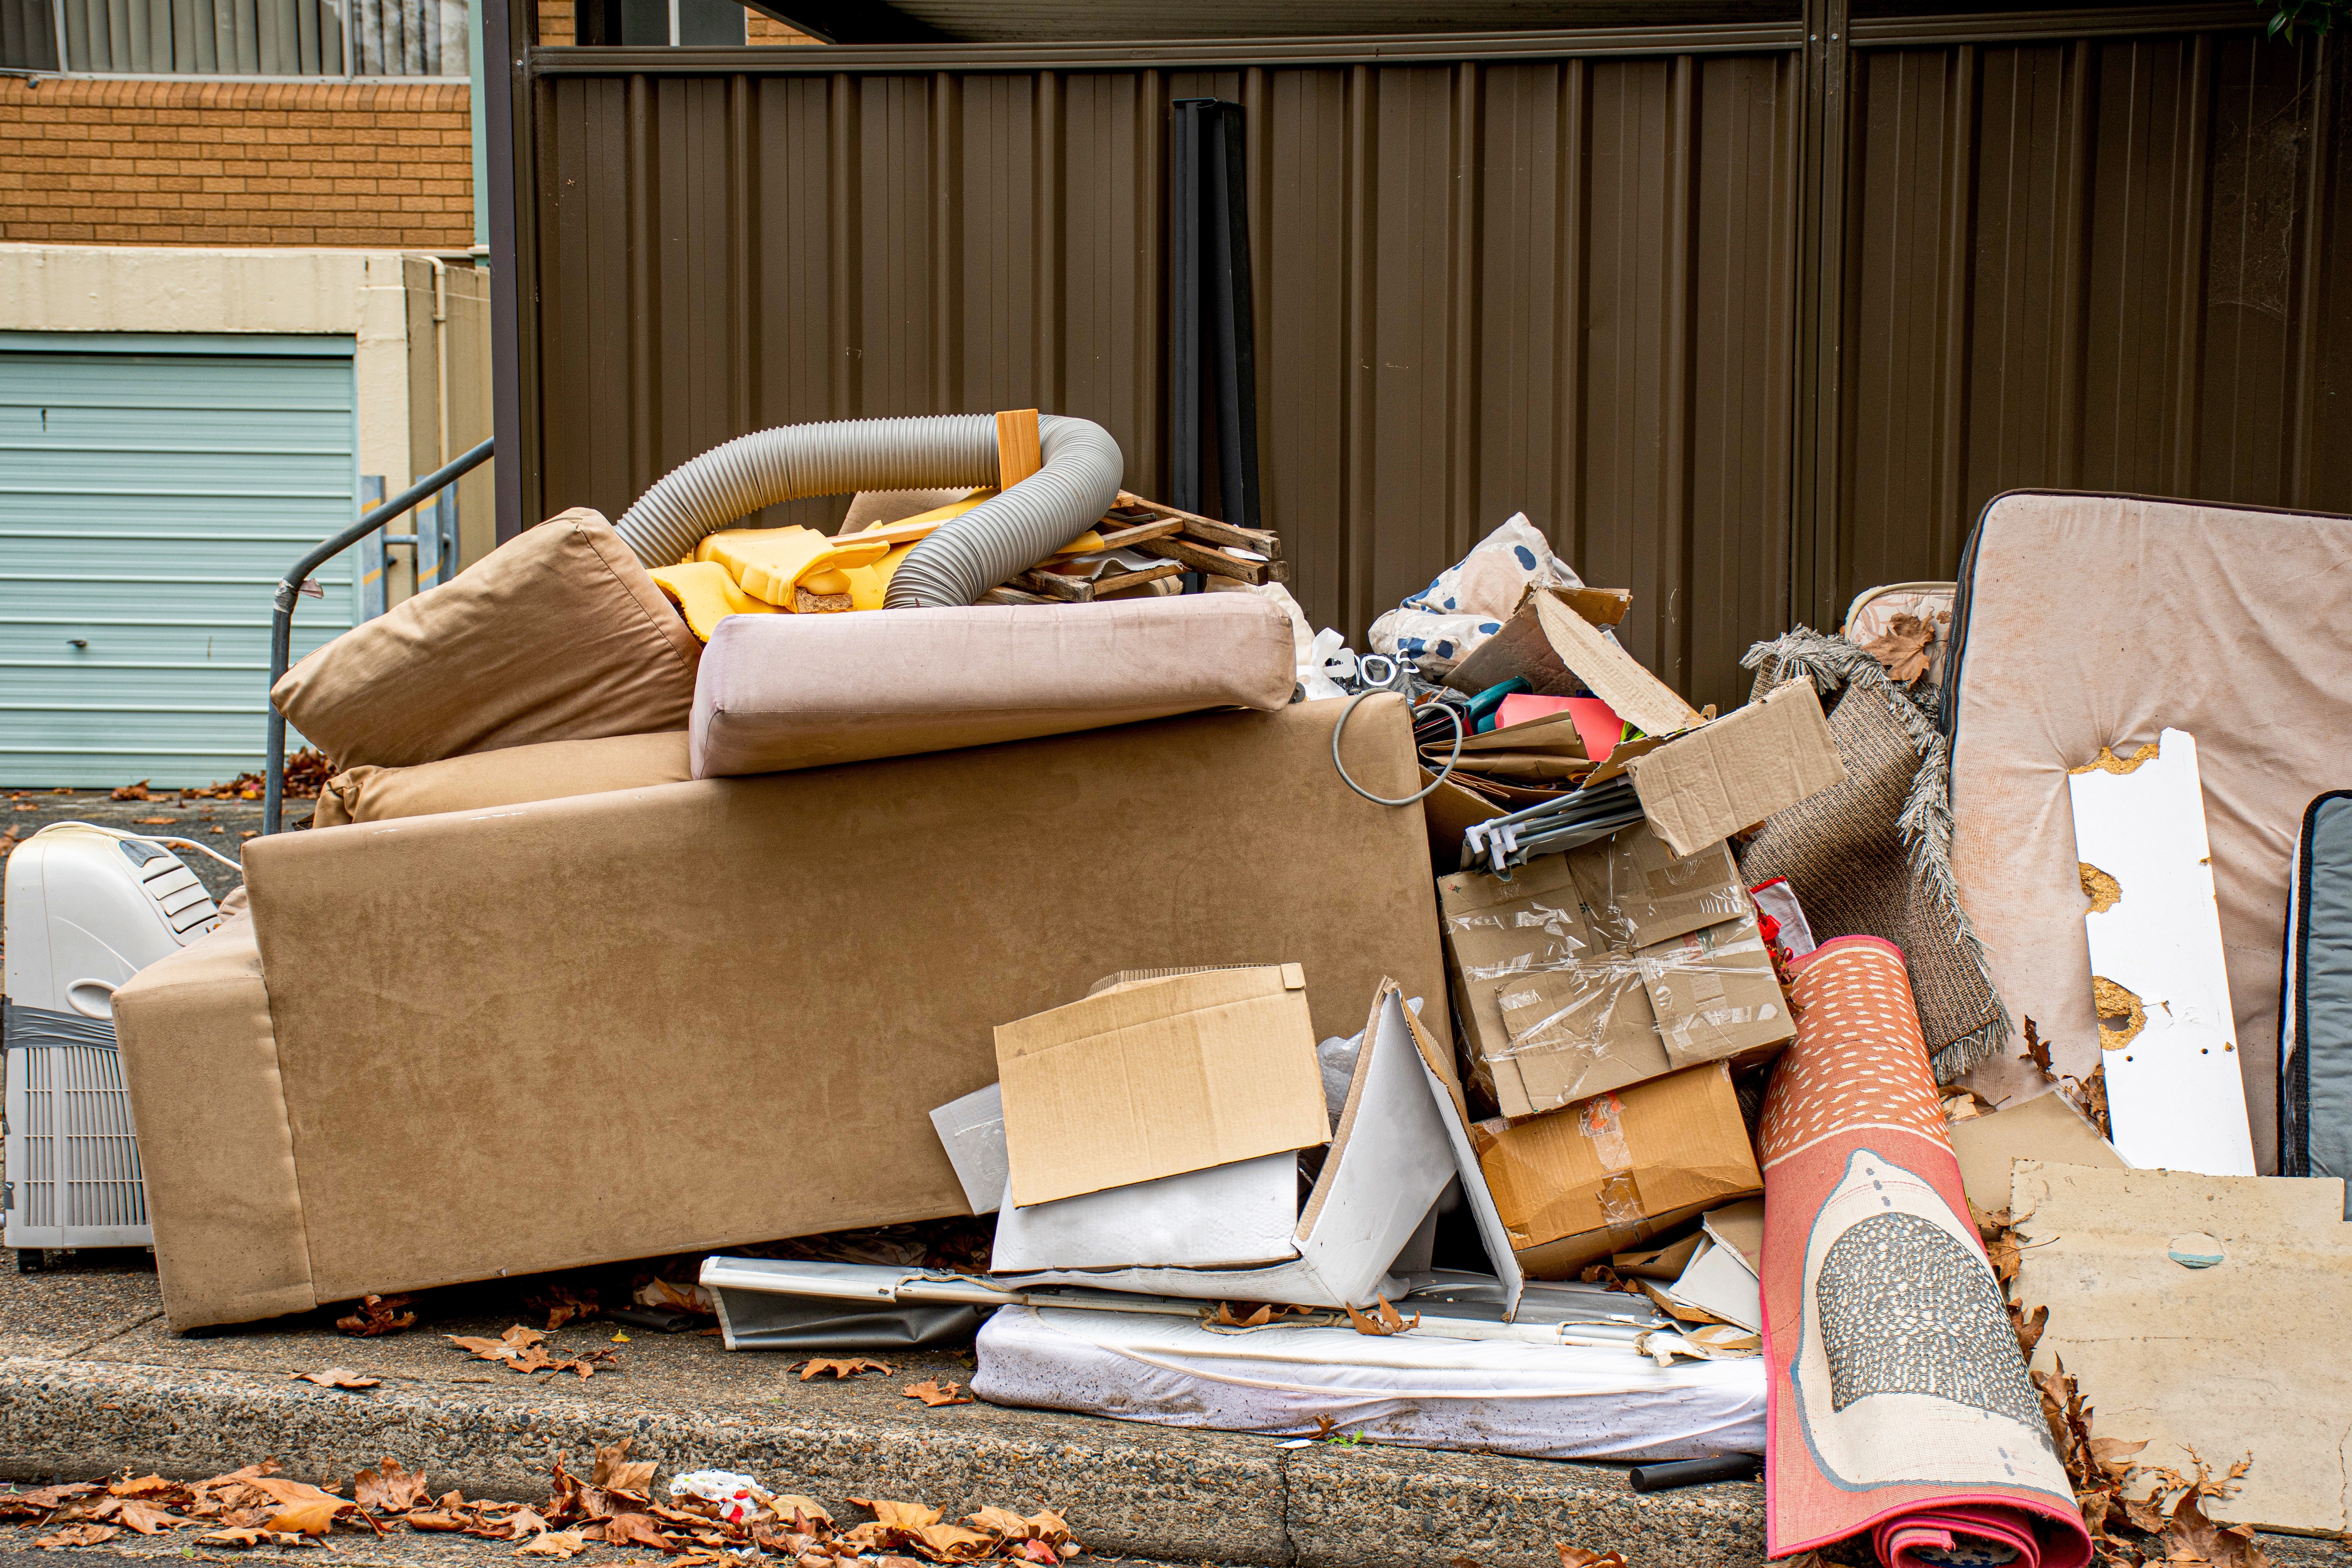 Photo of piles of rubbish and furniture